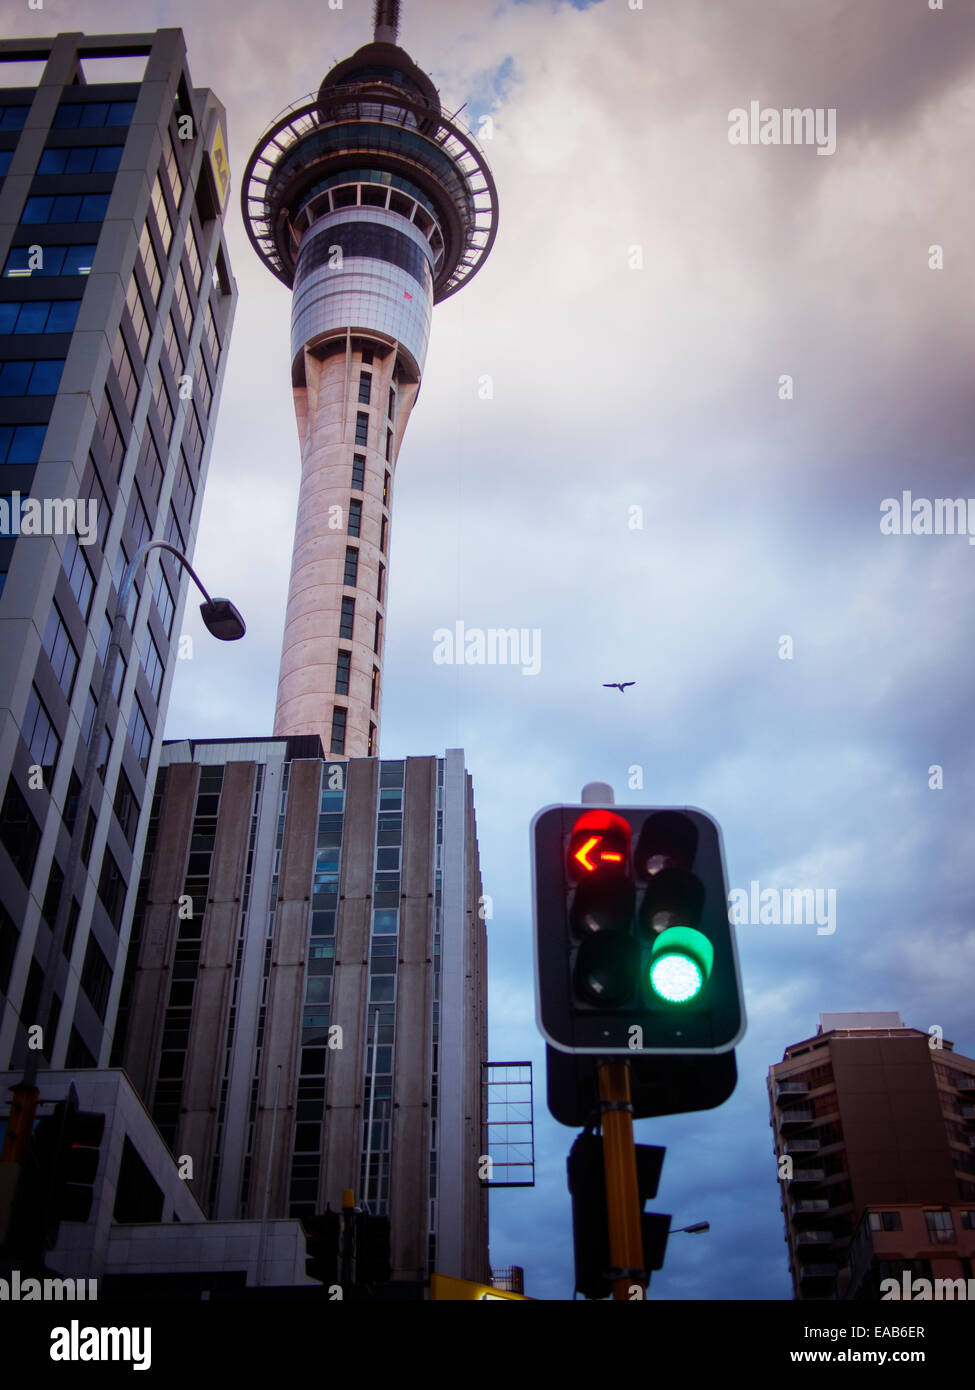 Auckland Skytower and traffic lights Stock Photo